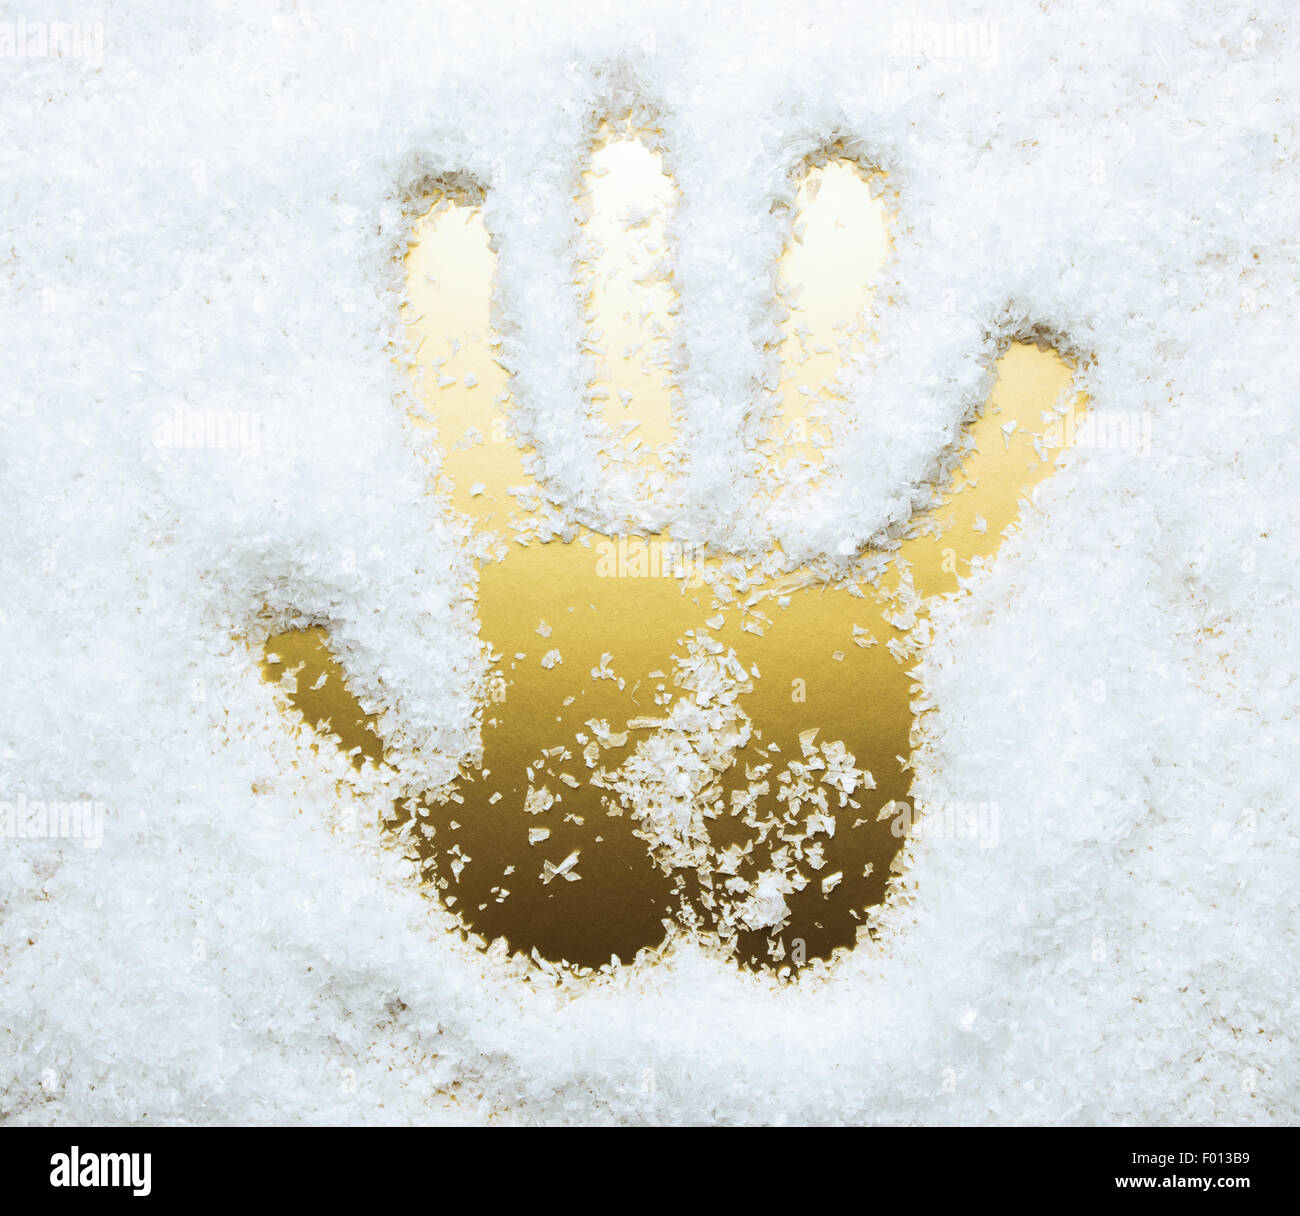 Hand print in artificial snow, golden color Stock Photo